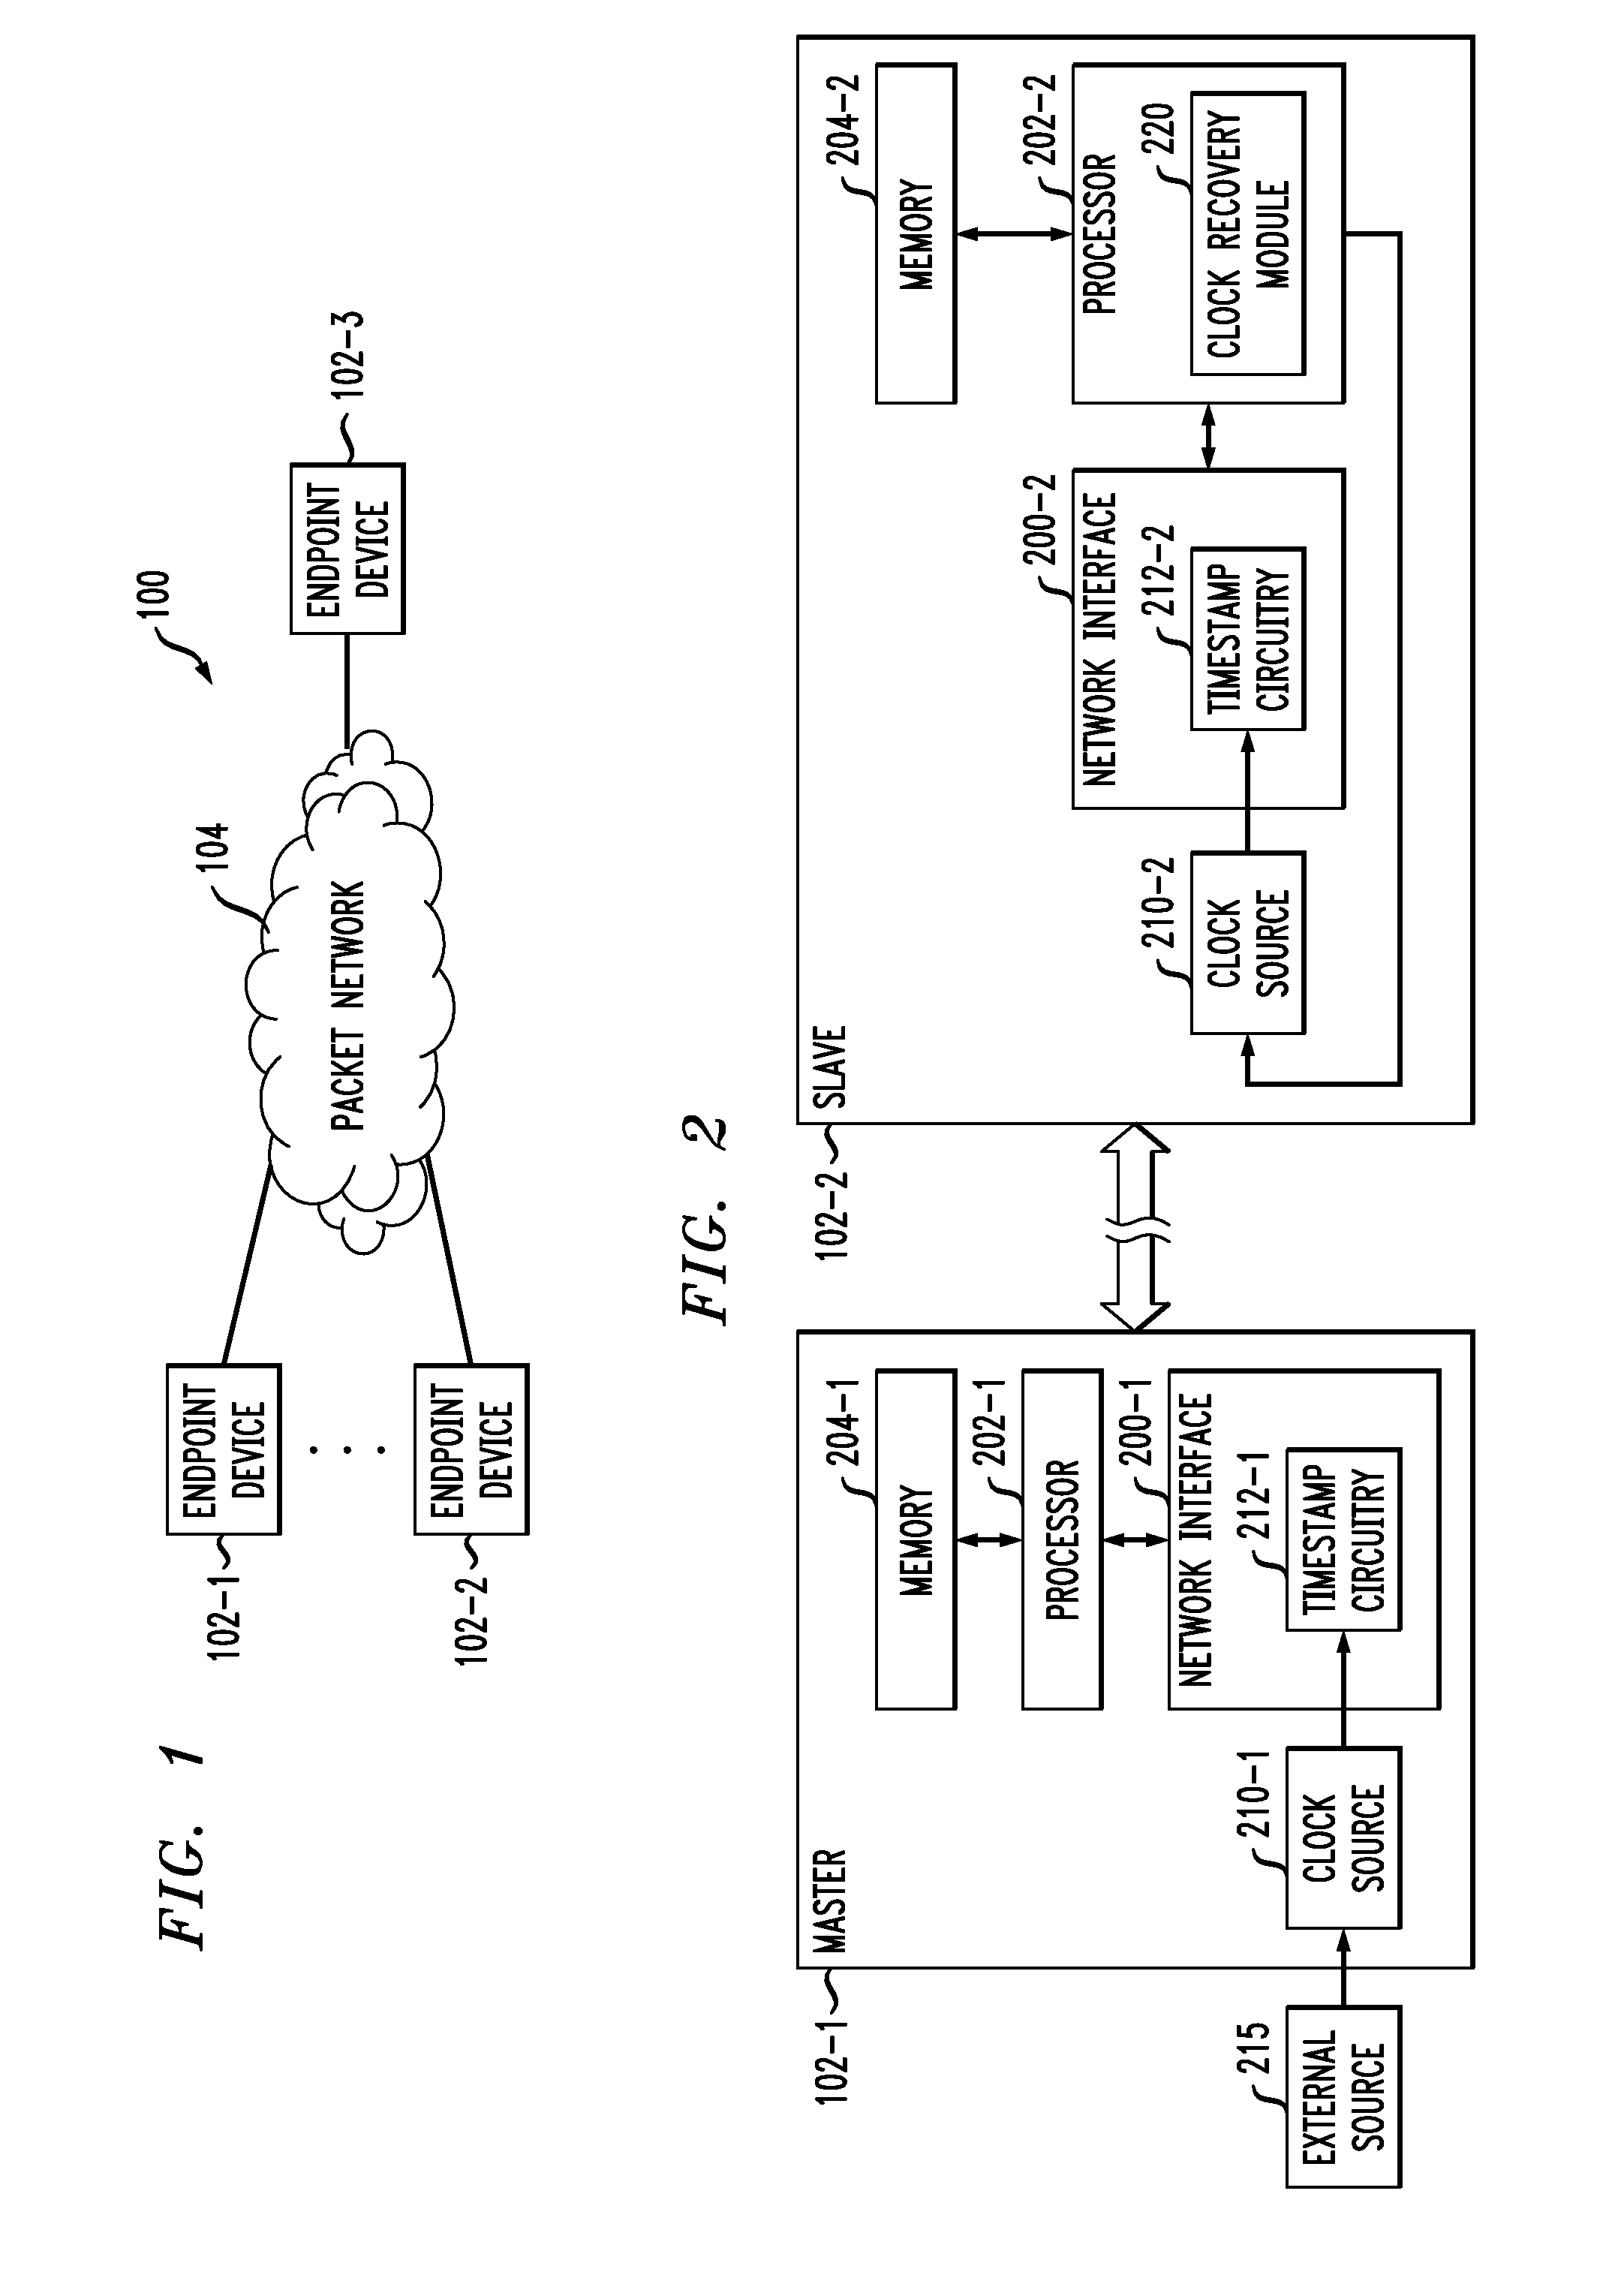 Frequency Synchronization Using First and Second Frequency Error Estimators